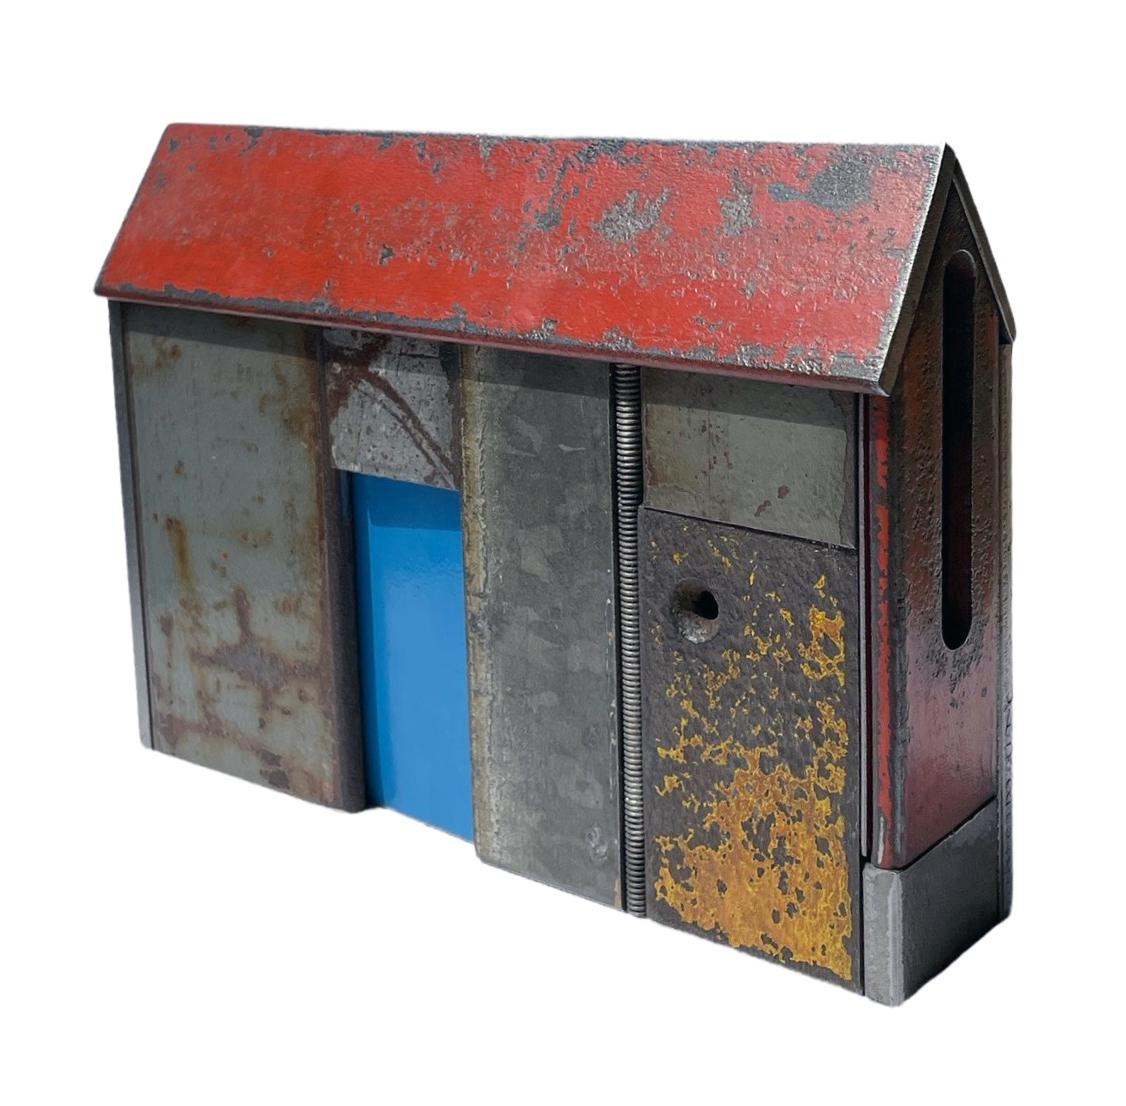 American Jim Rose Barn House Structure, Welded Steel Sculpture Made with Salvaged Steel